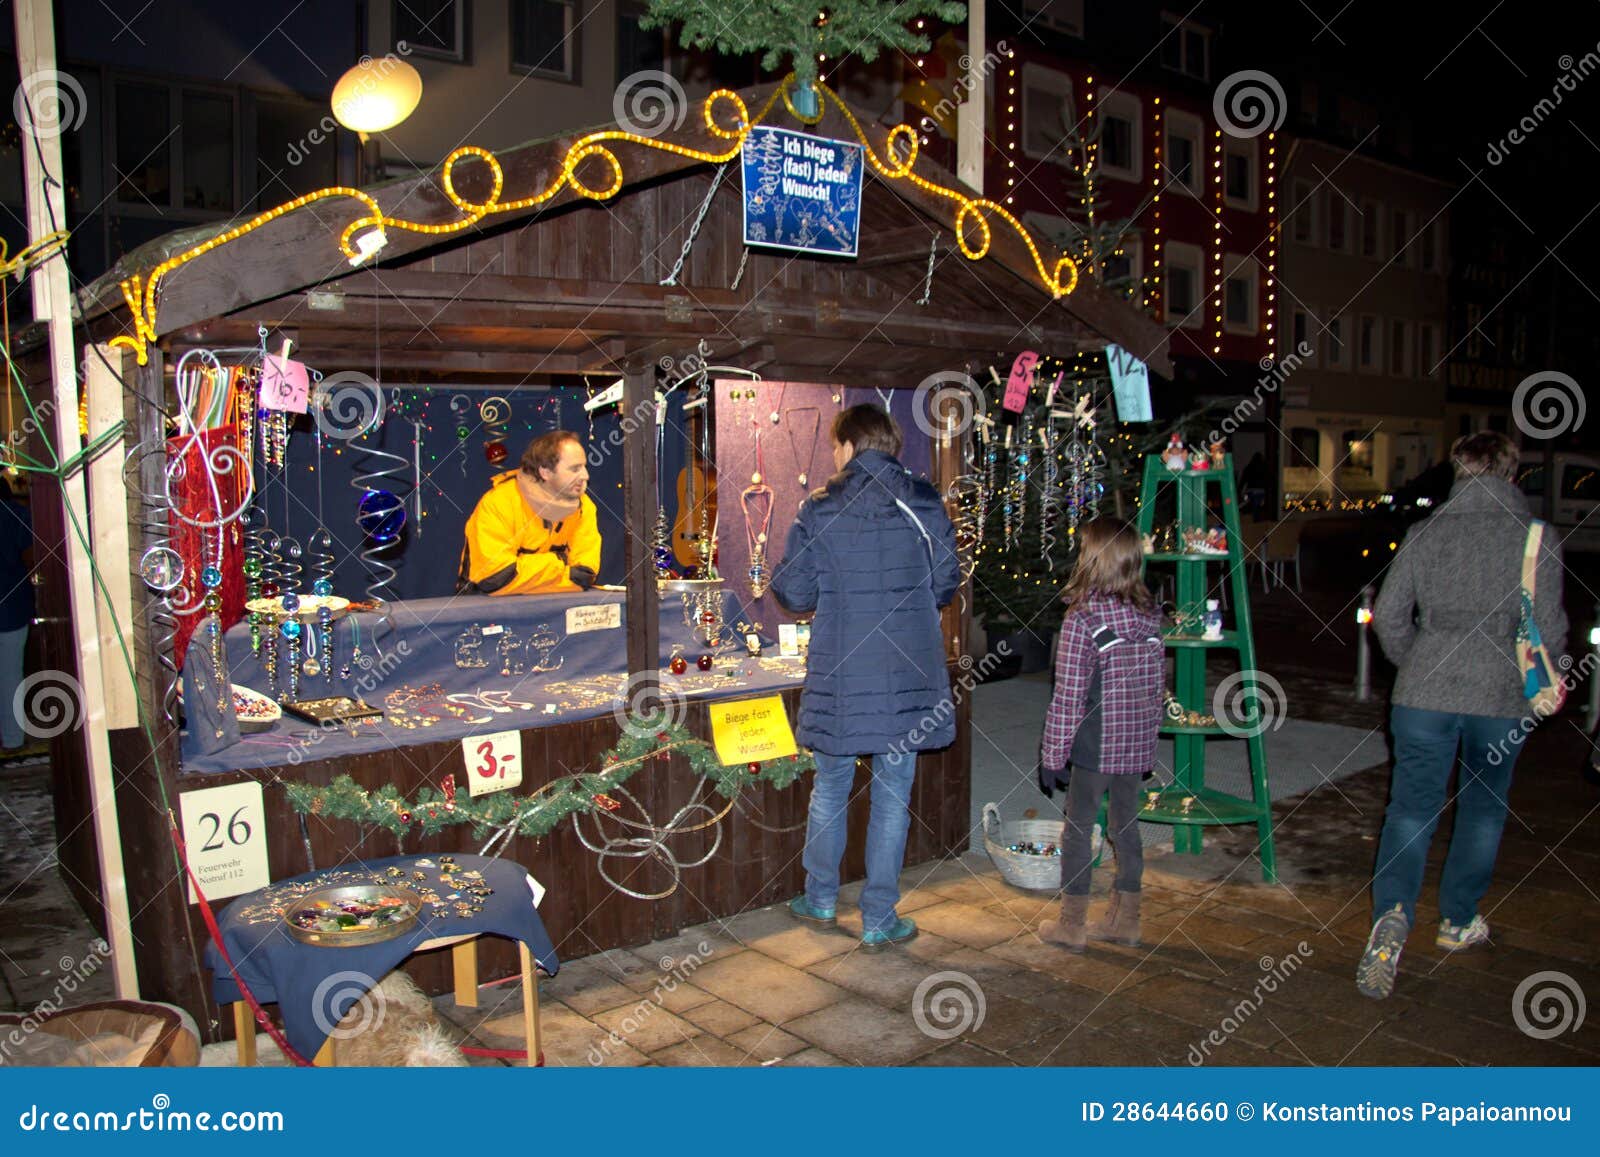 Christmas Market In Offenburg, Germany Editorial Image 